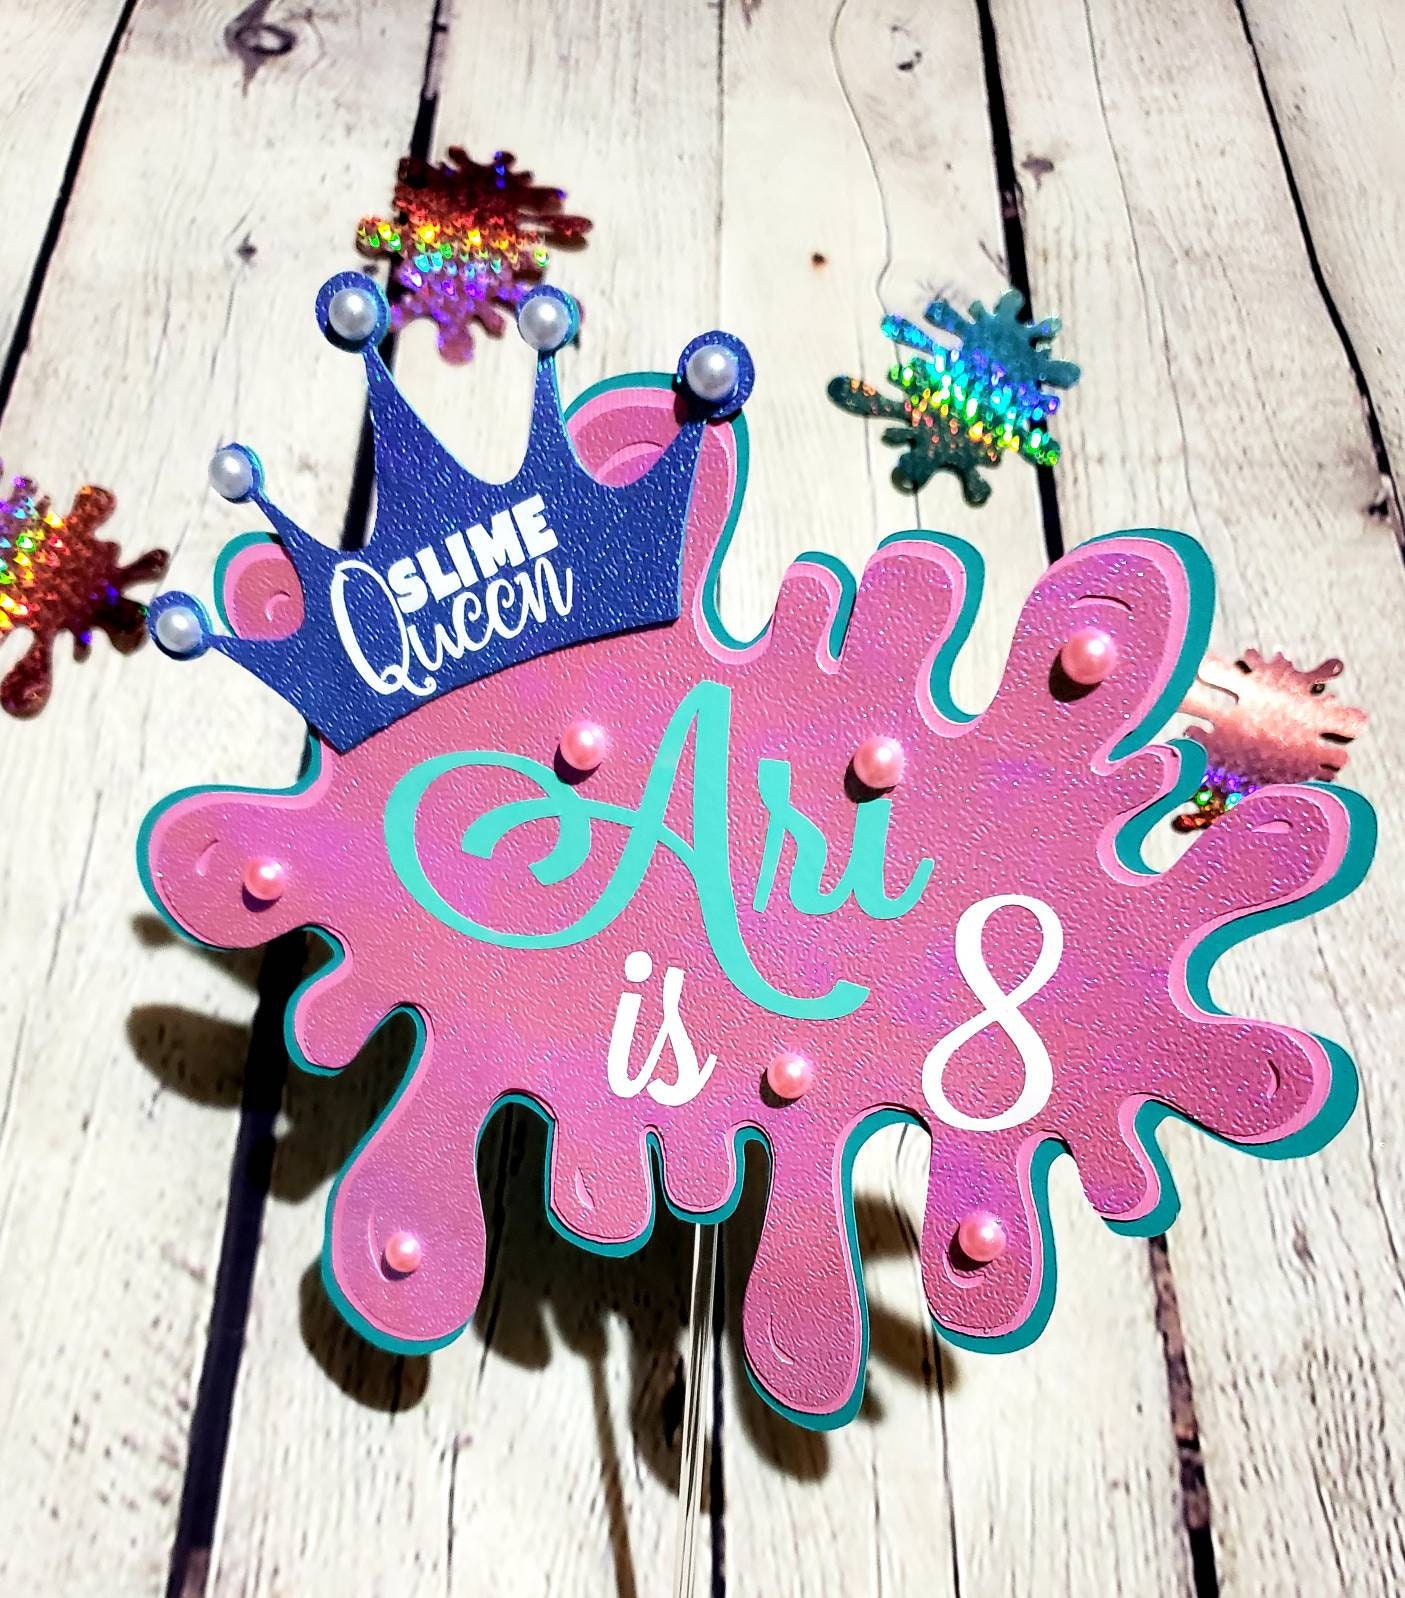 Slime Happy Birthday Cake Topper - Slime Queen Birthday Cake Topper 6pcs  Slime Cupcake Toppers - Girl's Birthday Party Decorations